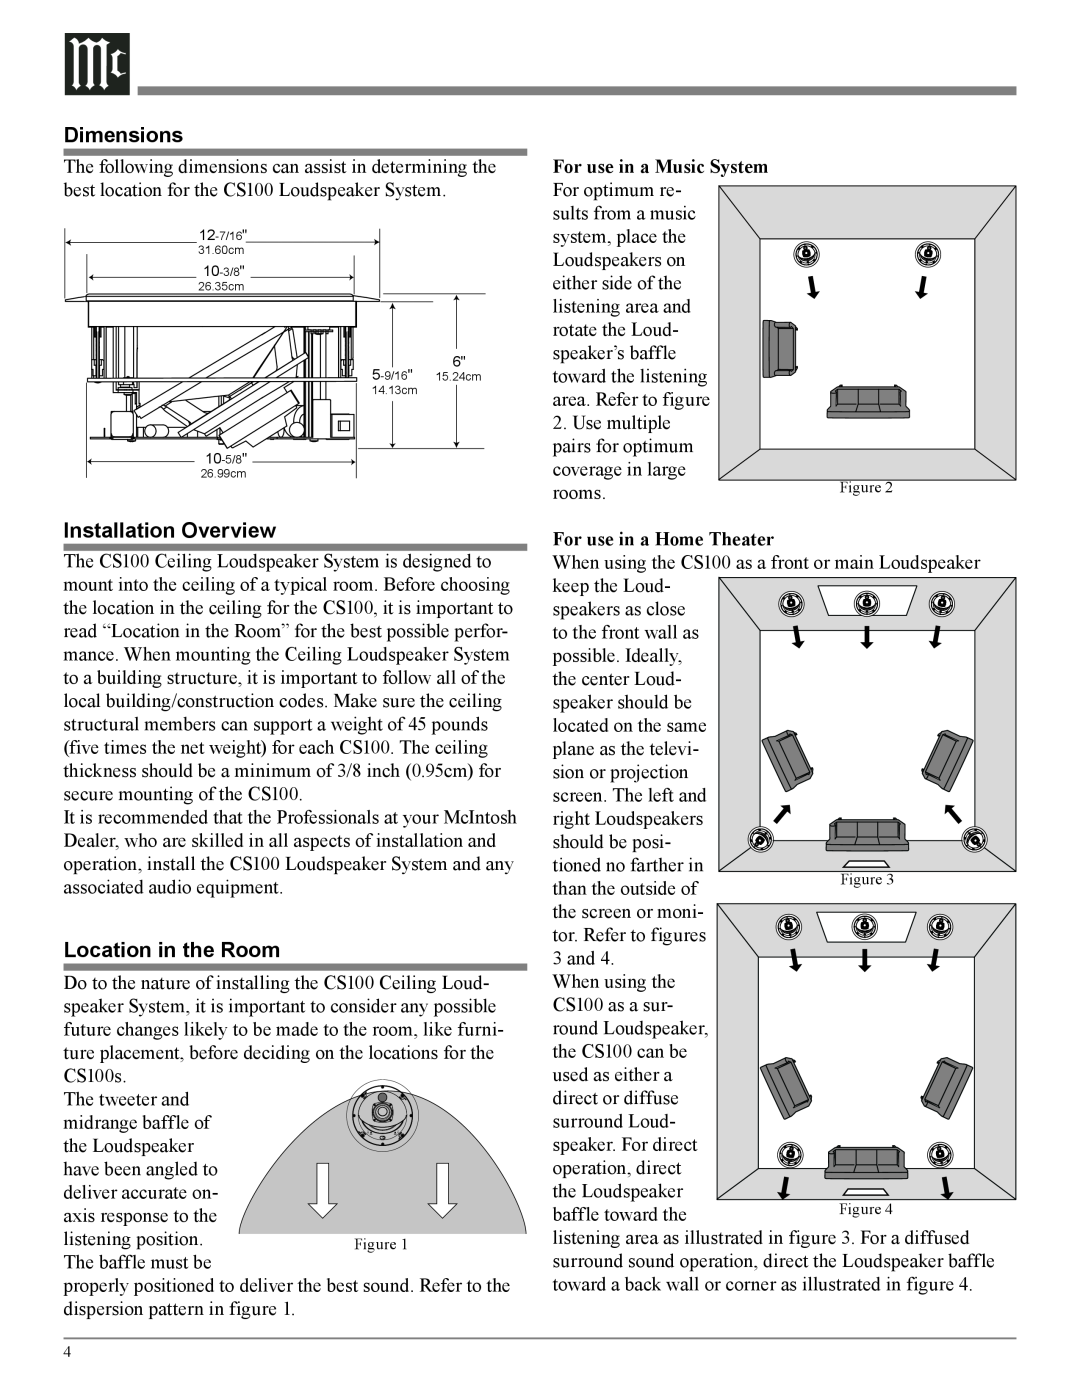 McIntosh CS100 manual Dimensions, Installation Overview, Location in the Room, For use in a Music System 